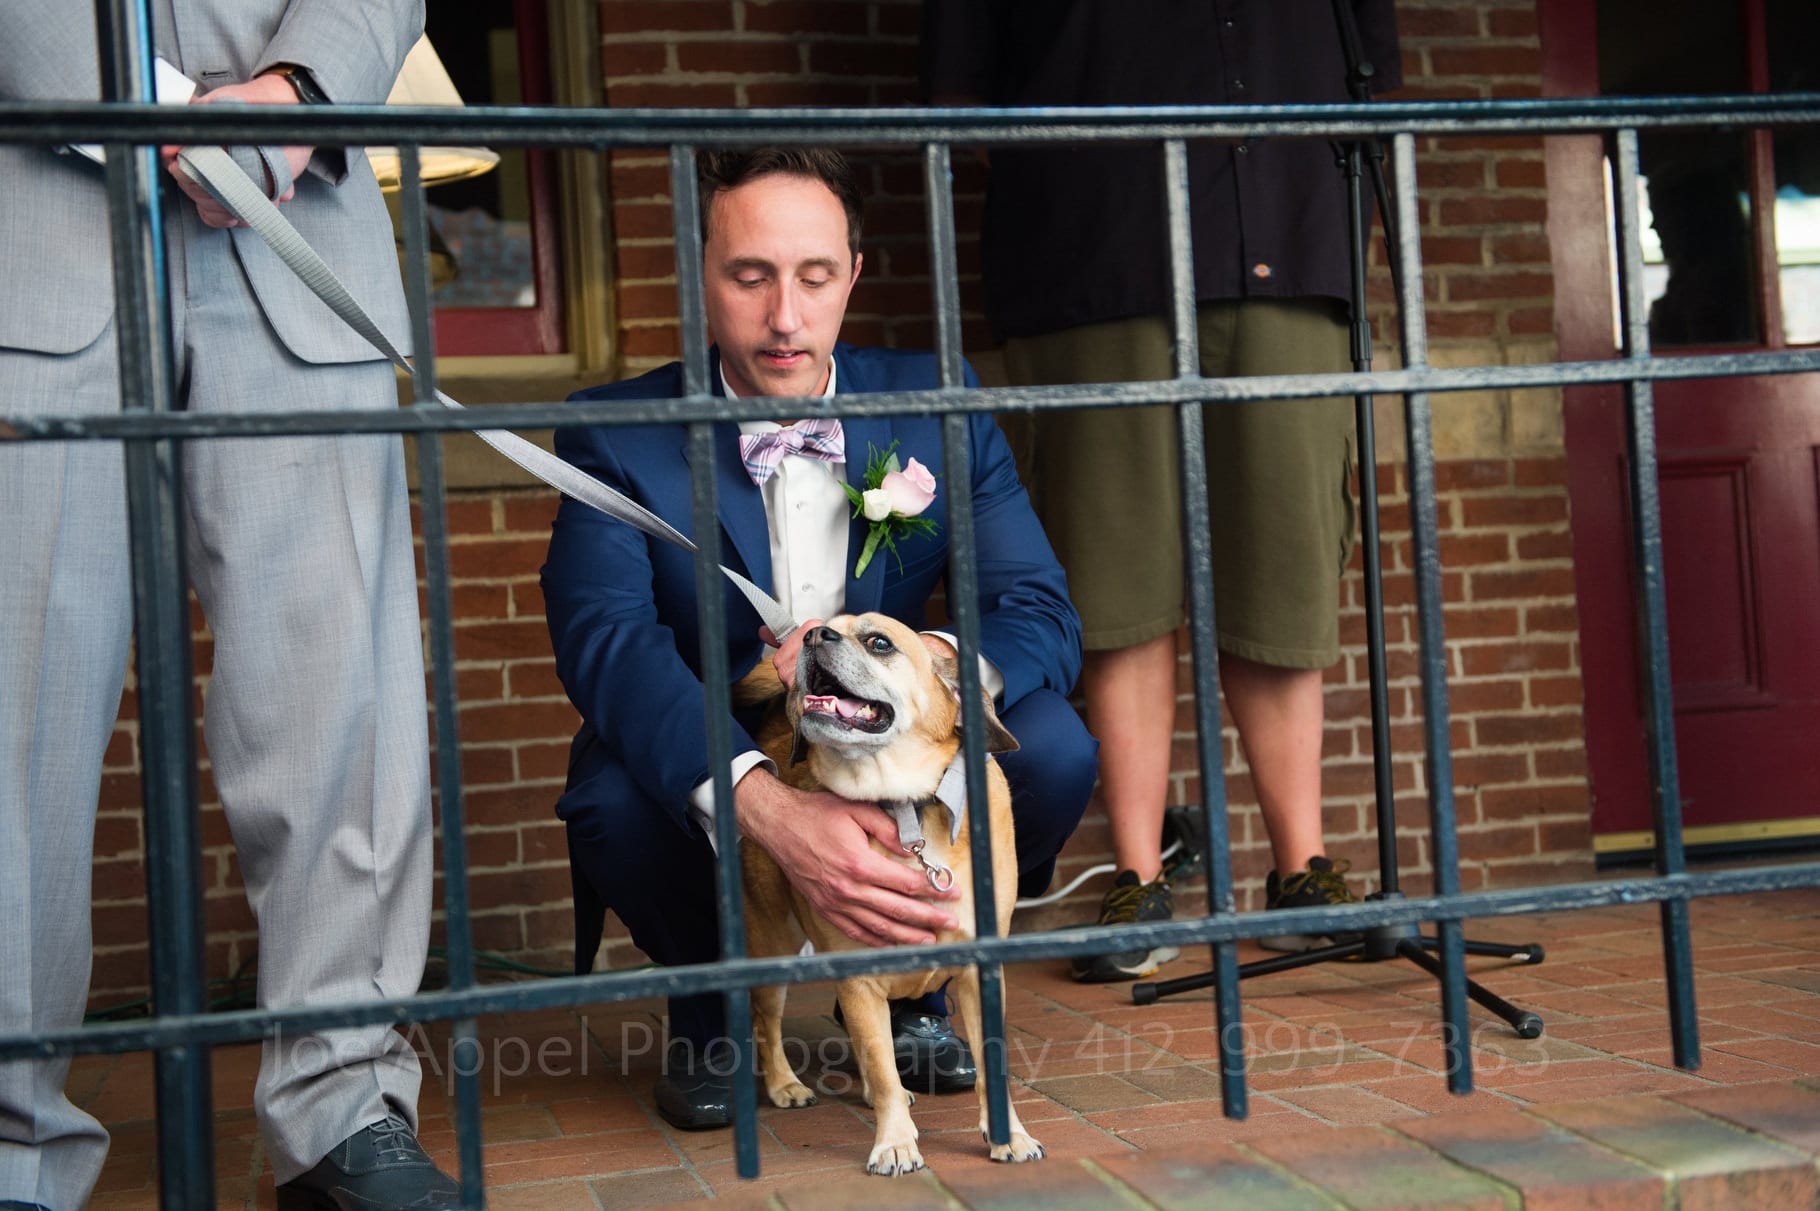 A groom bends down to calm his anxious dog during a wedding ceremony.